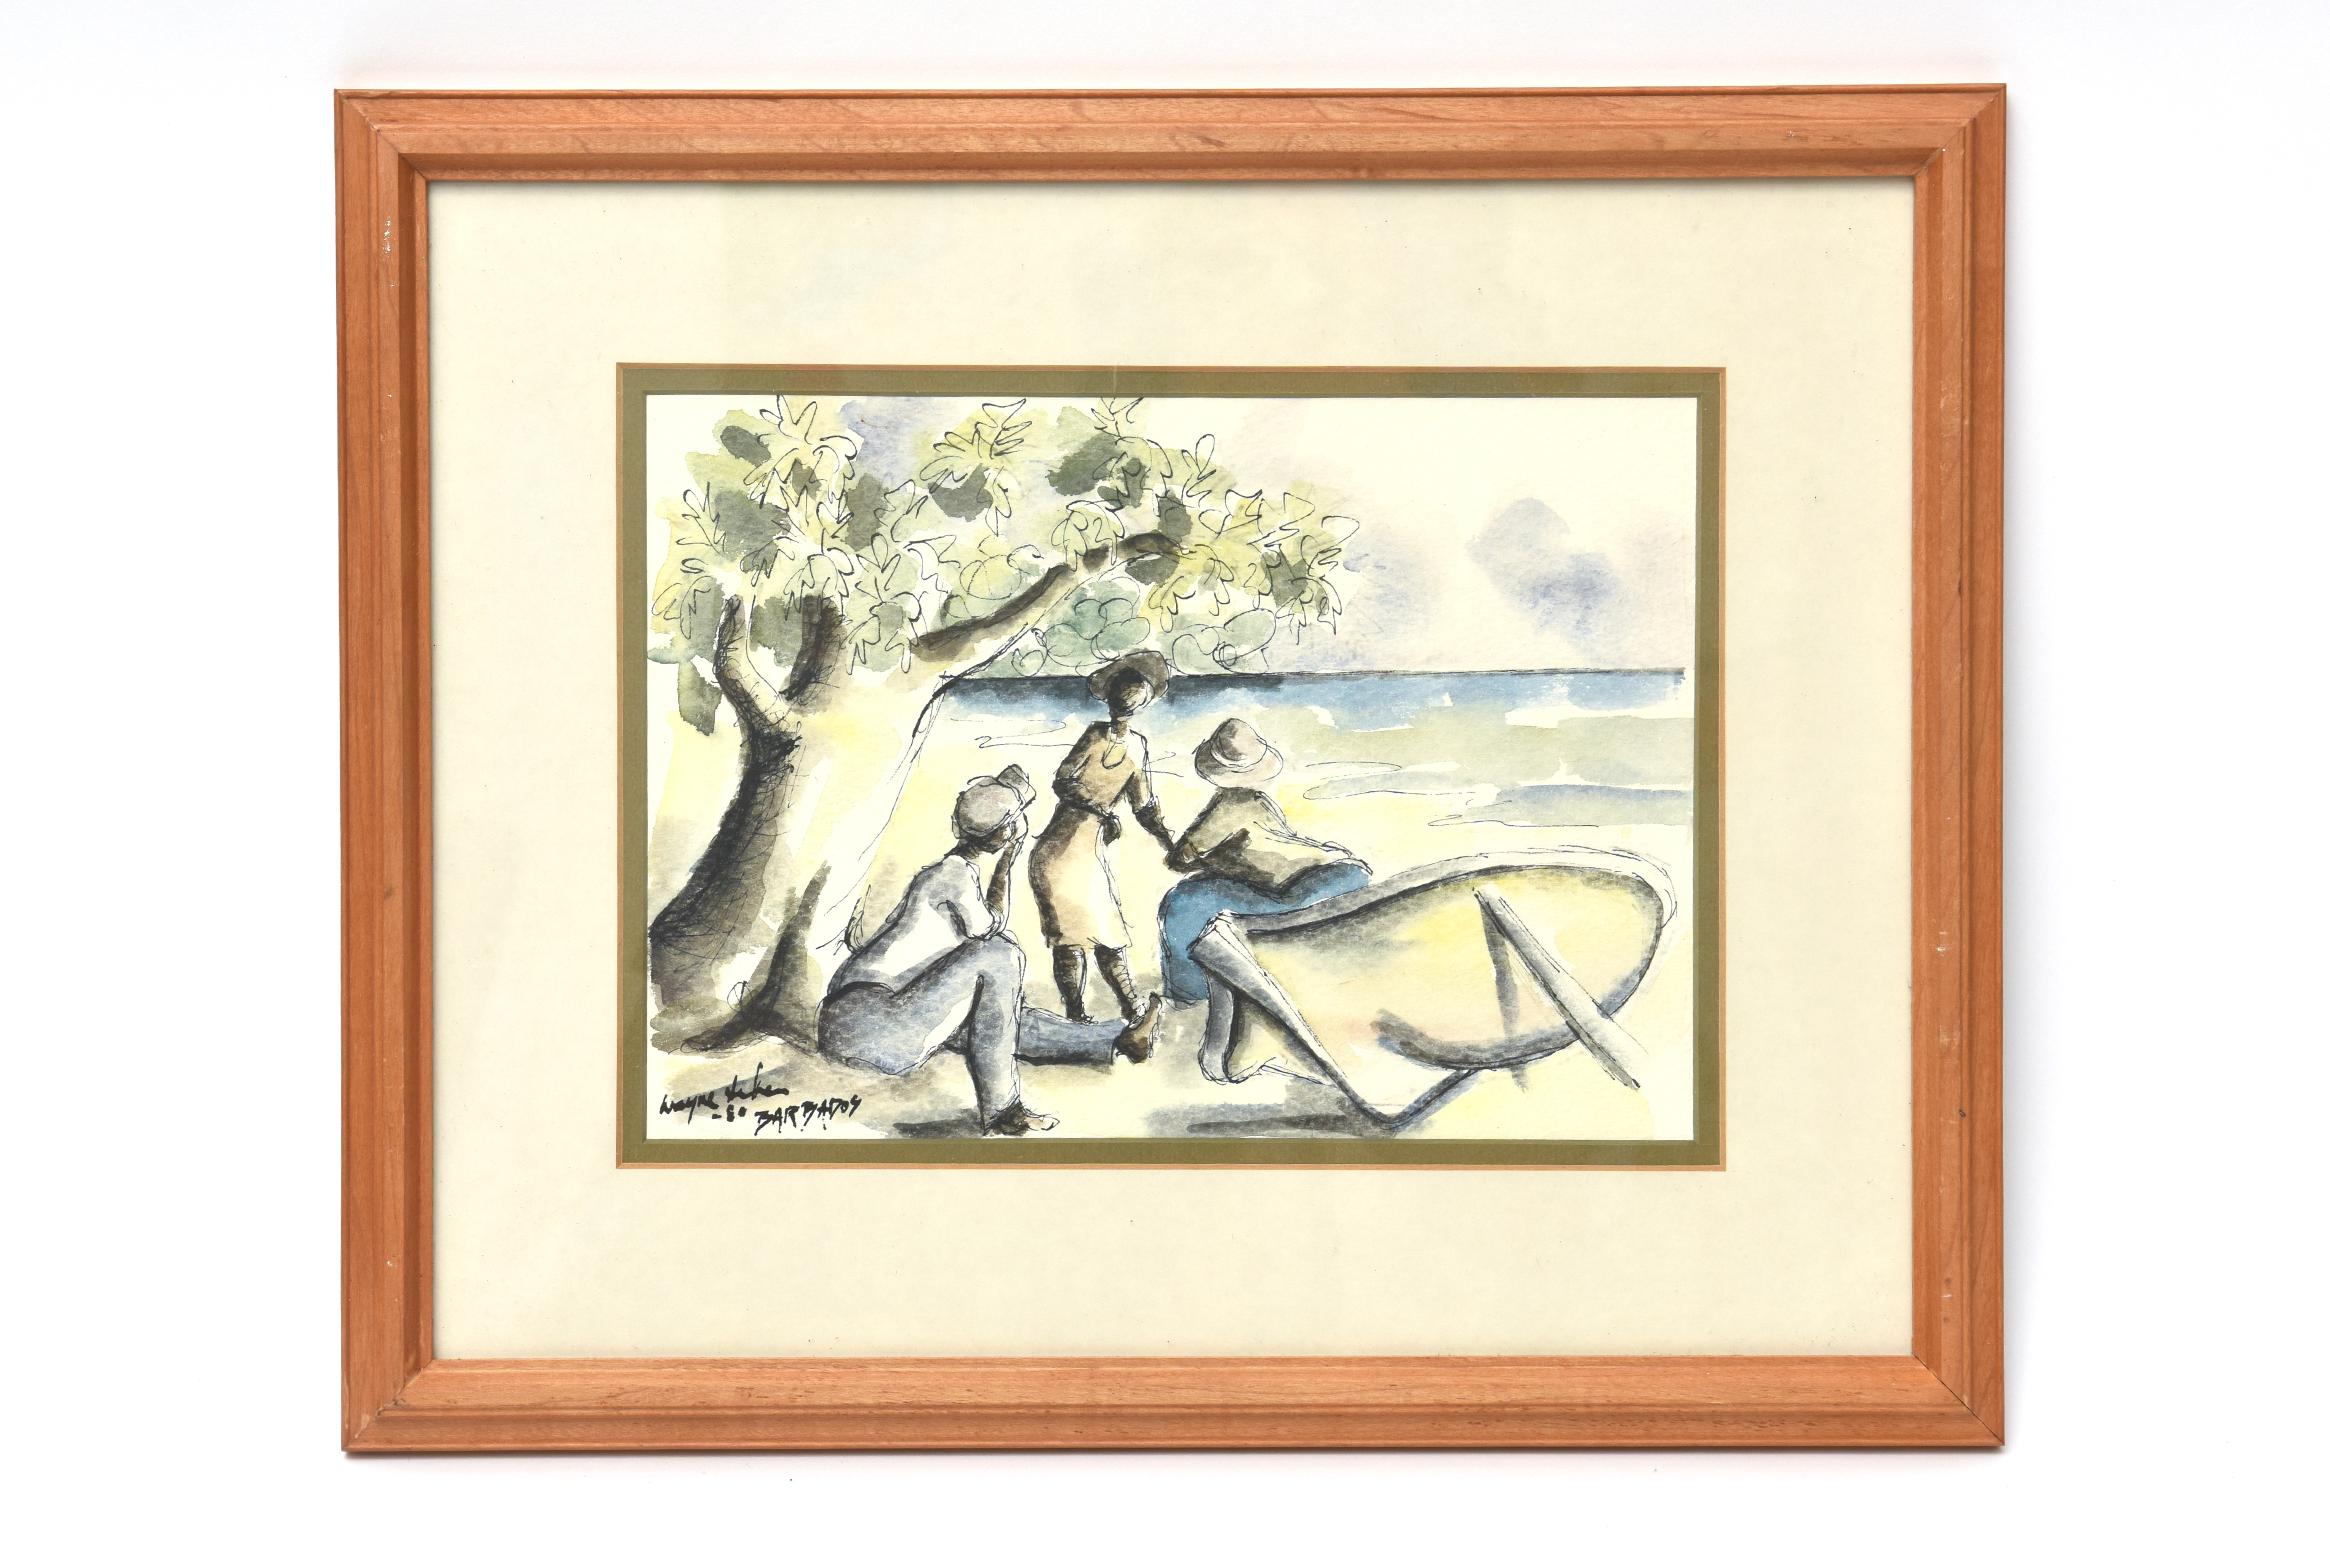 These are a pair of signed vintage tropical landscape original one of a kind watercolor and ink drawings on paper that were purchased from a NYC auction house. They are from the Barbadian school and are titled Barbados with year of 1960 or 1980. The